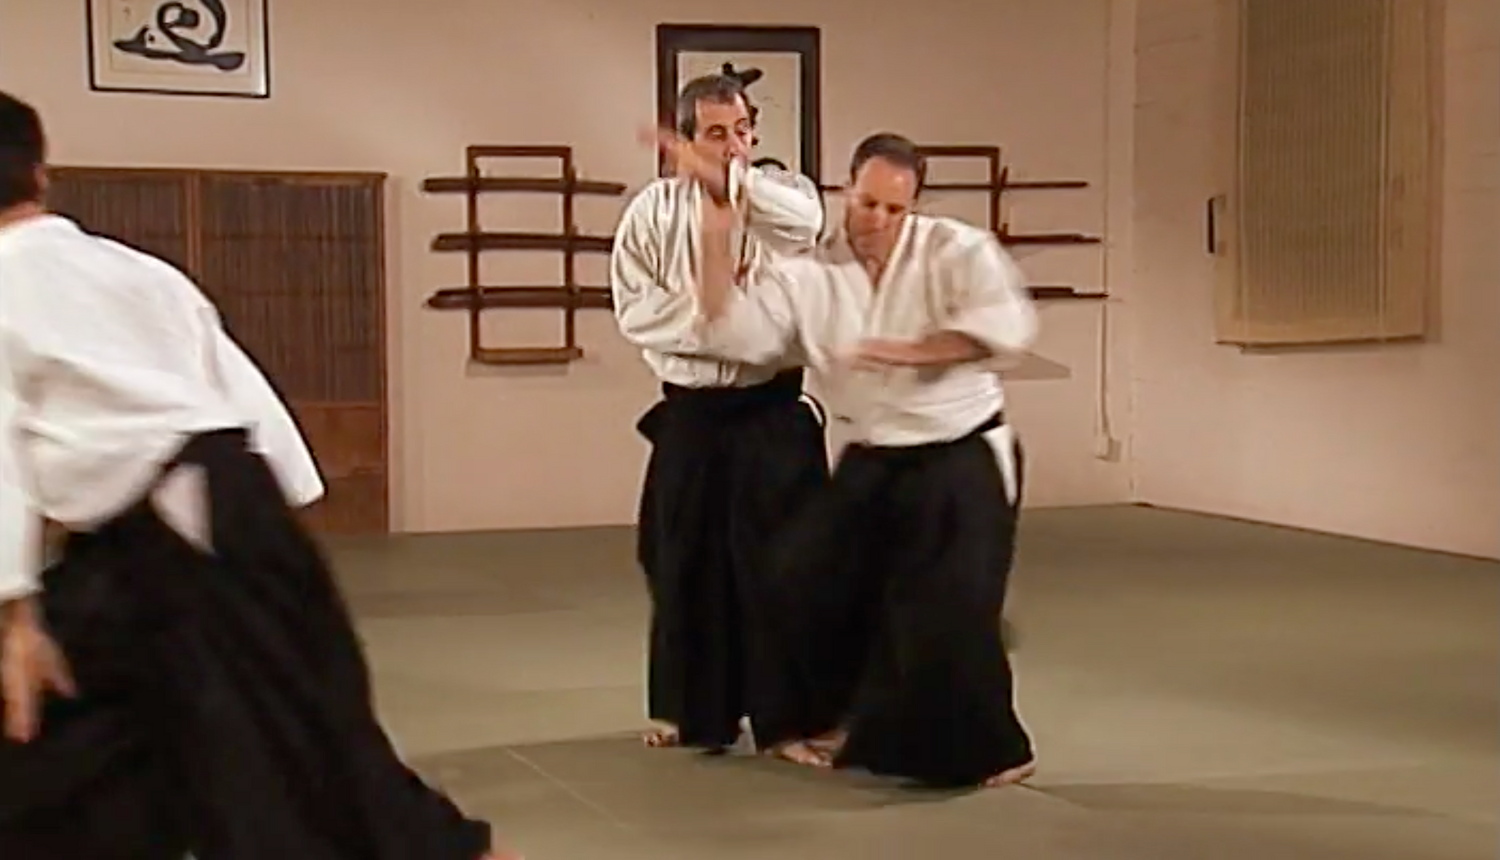 Aikido in Three Easy Lessons DVD by Richard Moon (Preowned) - Budovideos